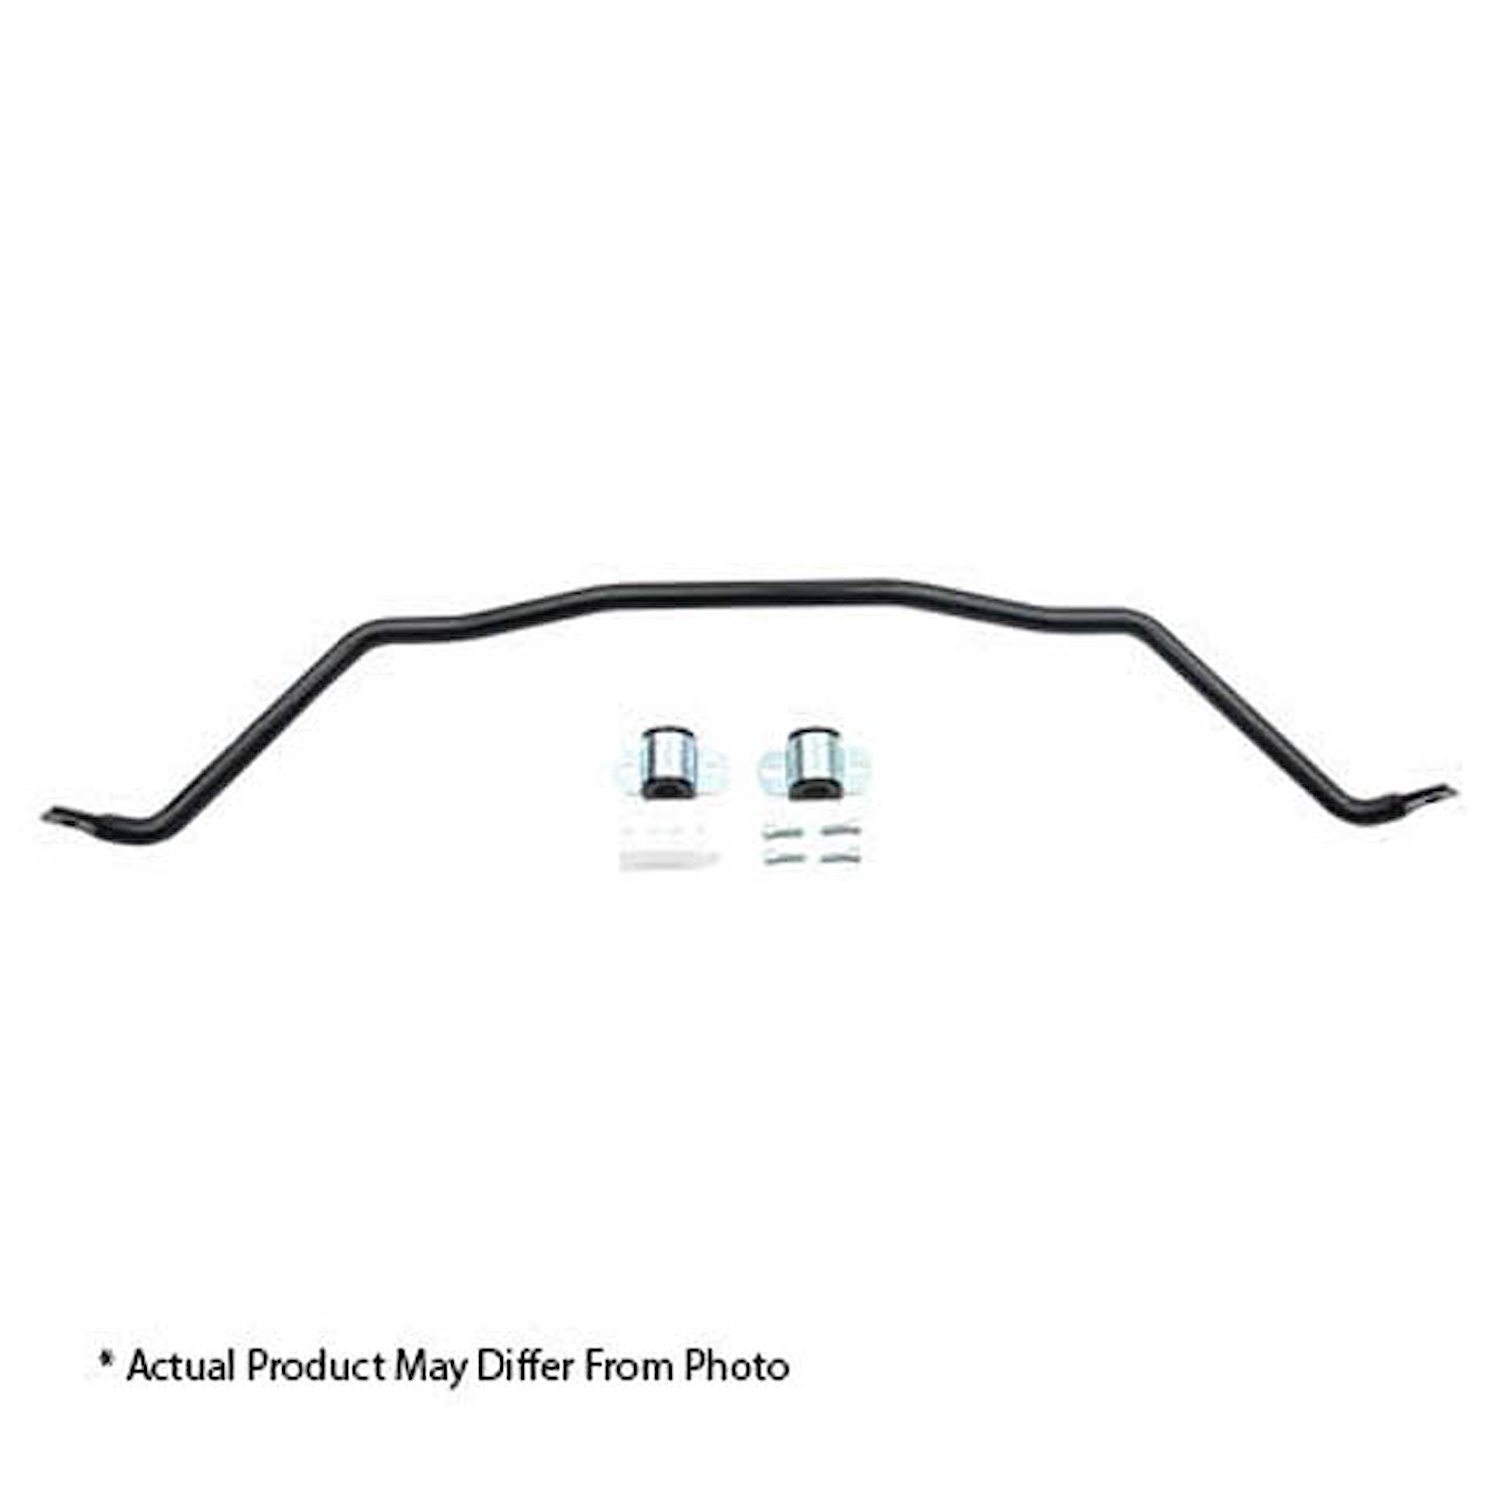 50303 Anti-Swaybar - Front for Select VW/Audi